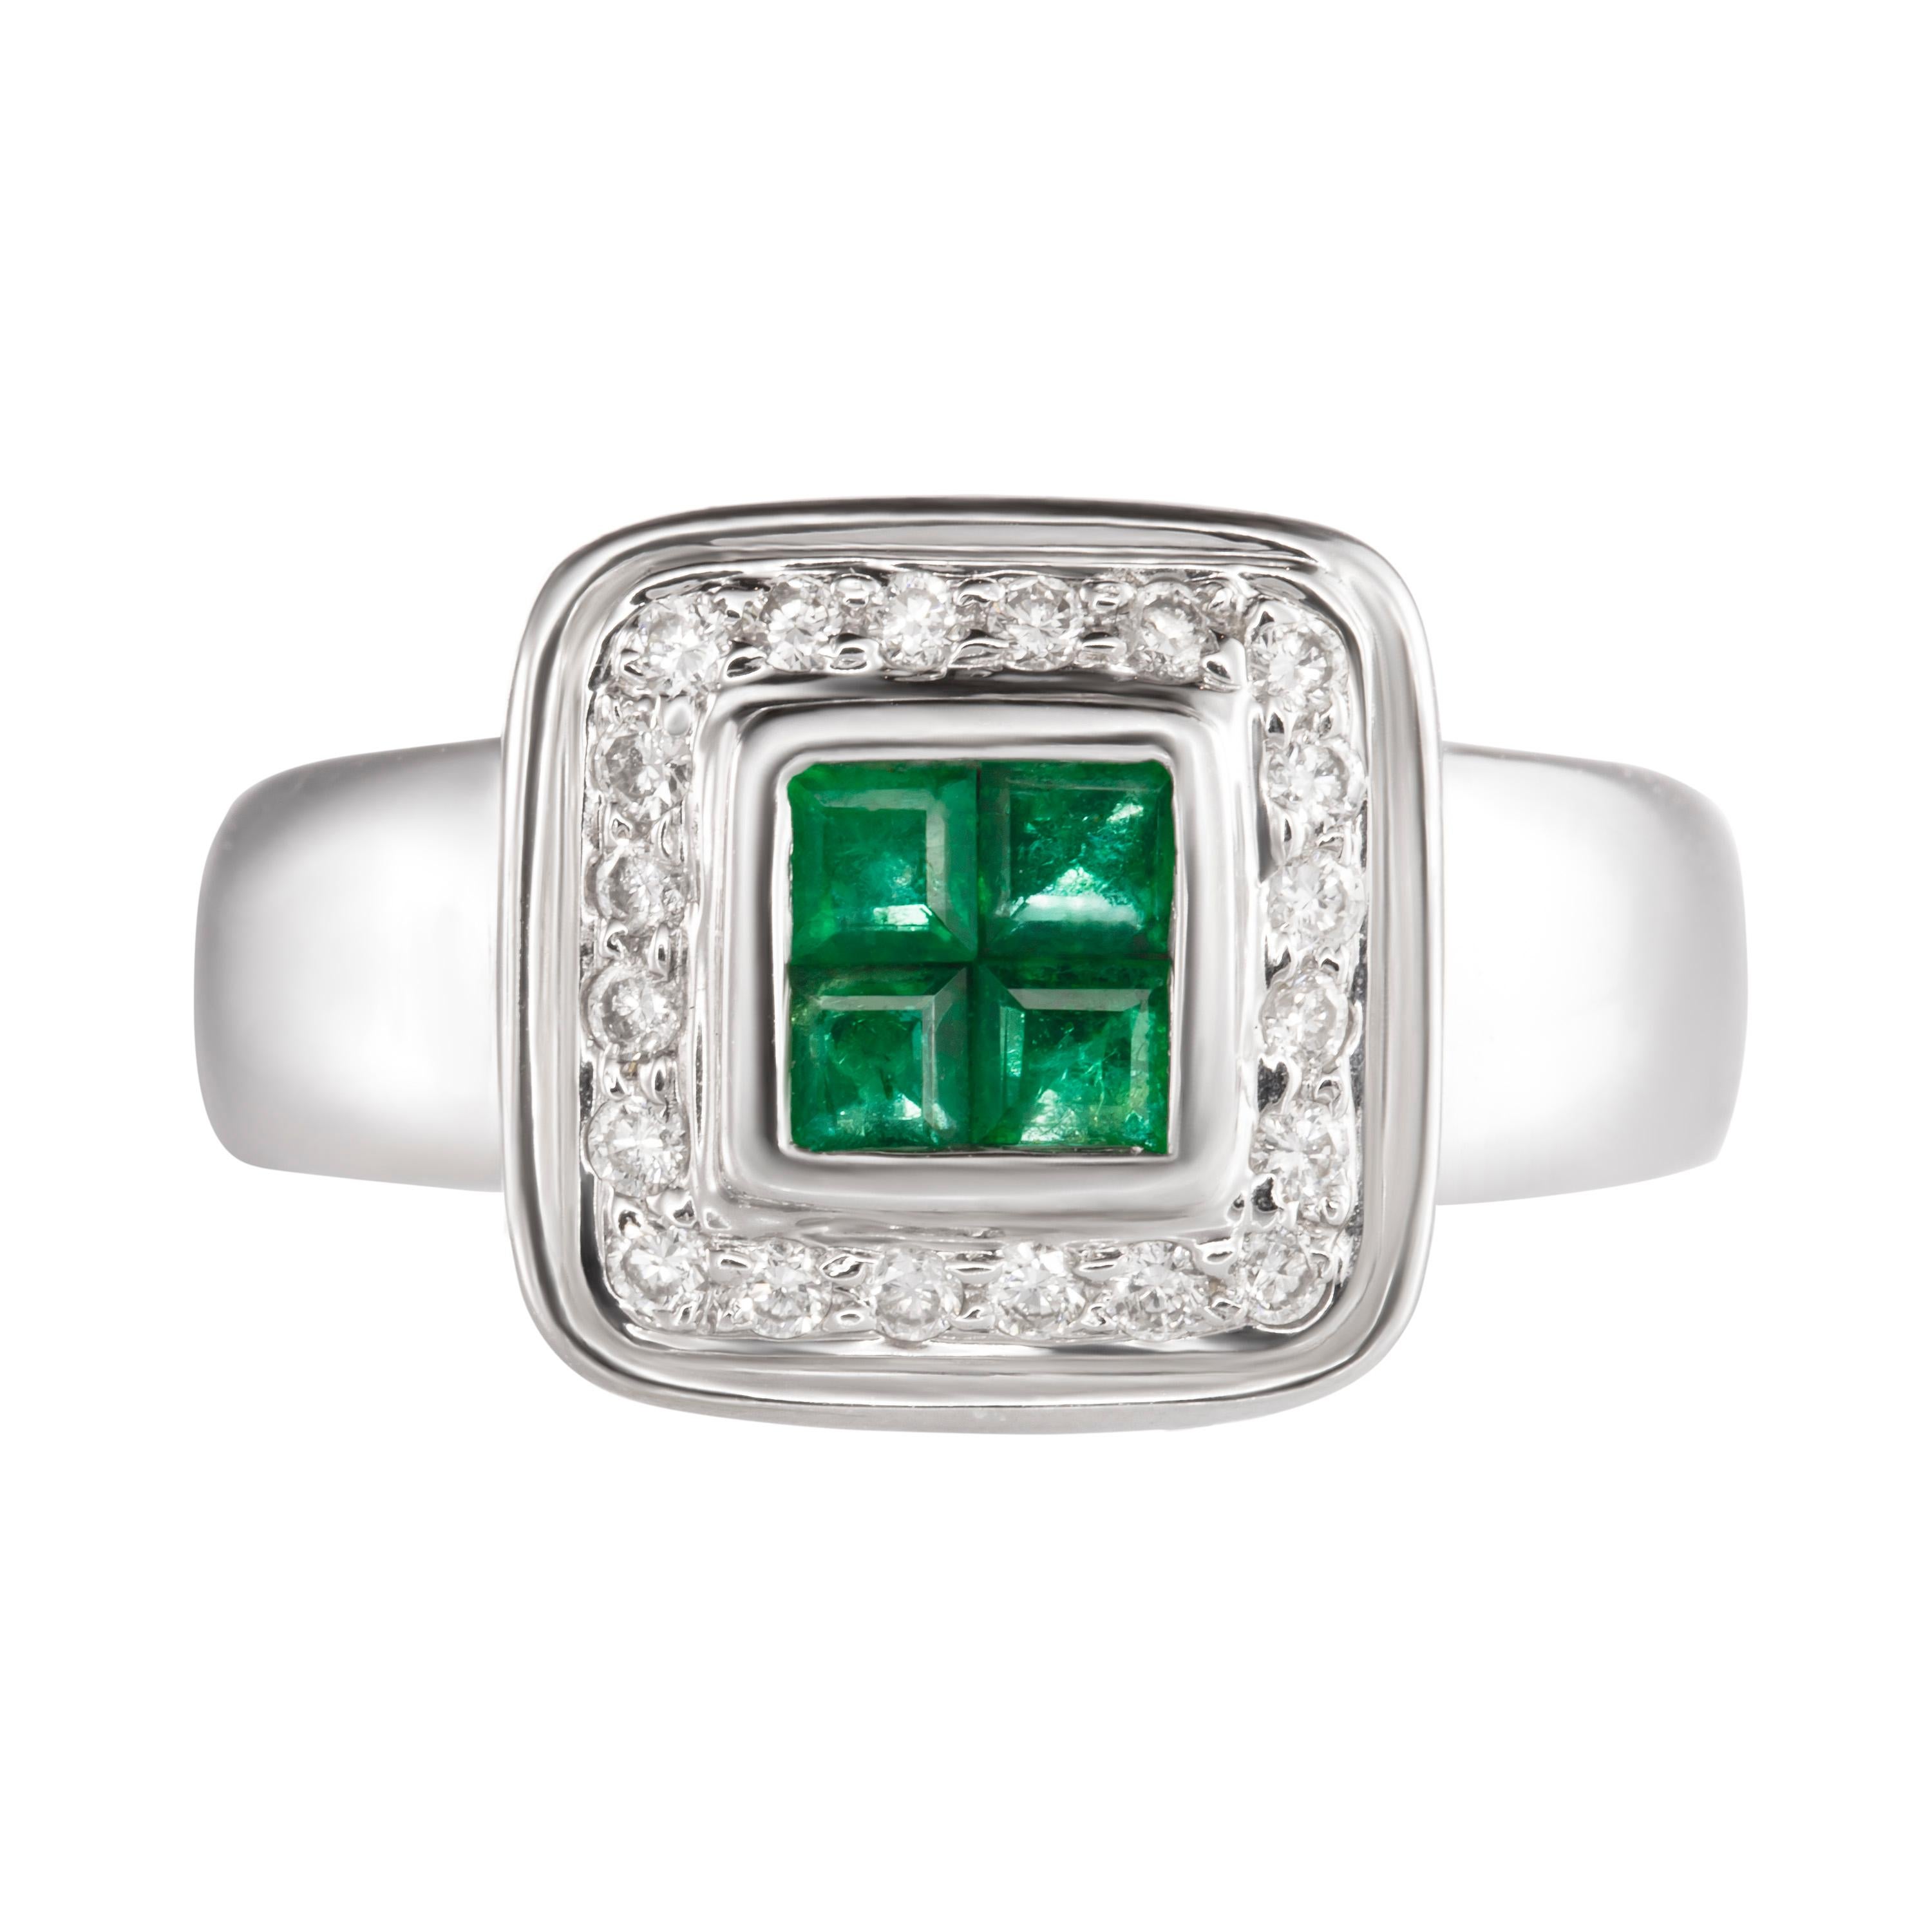 Encrusted with a stunning array of 0.46 carats of emeralds and 0.22 carats of diamonds, Butani's ring is fashioned in a sleek geometric design and molded from 18 karat white gold.  Currently a ring size US 6 3/4.  For other sizes, please contact